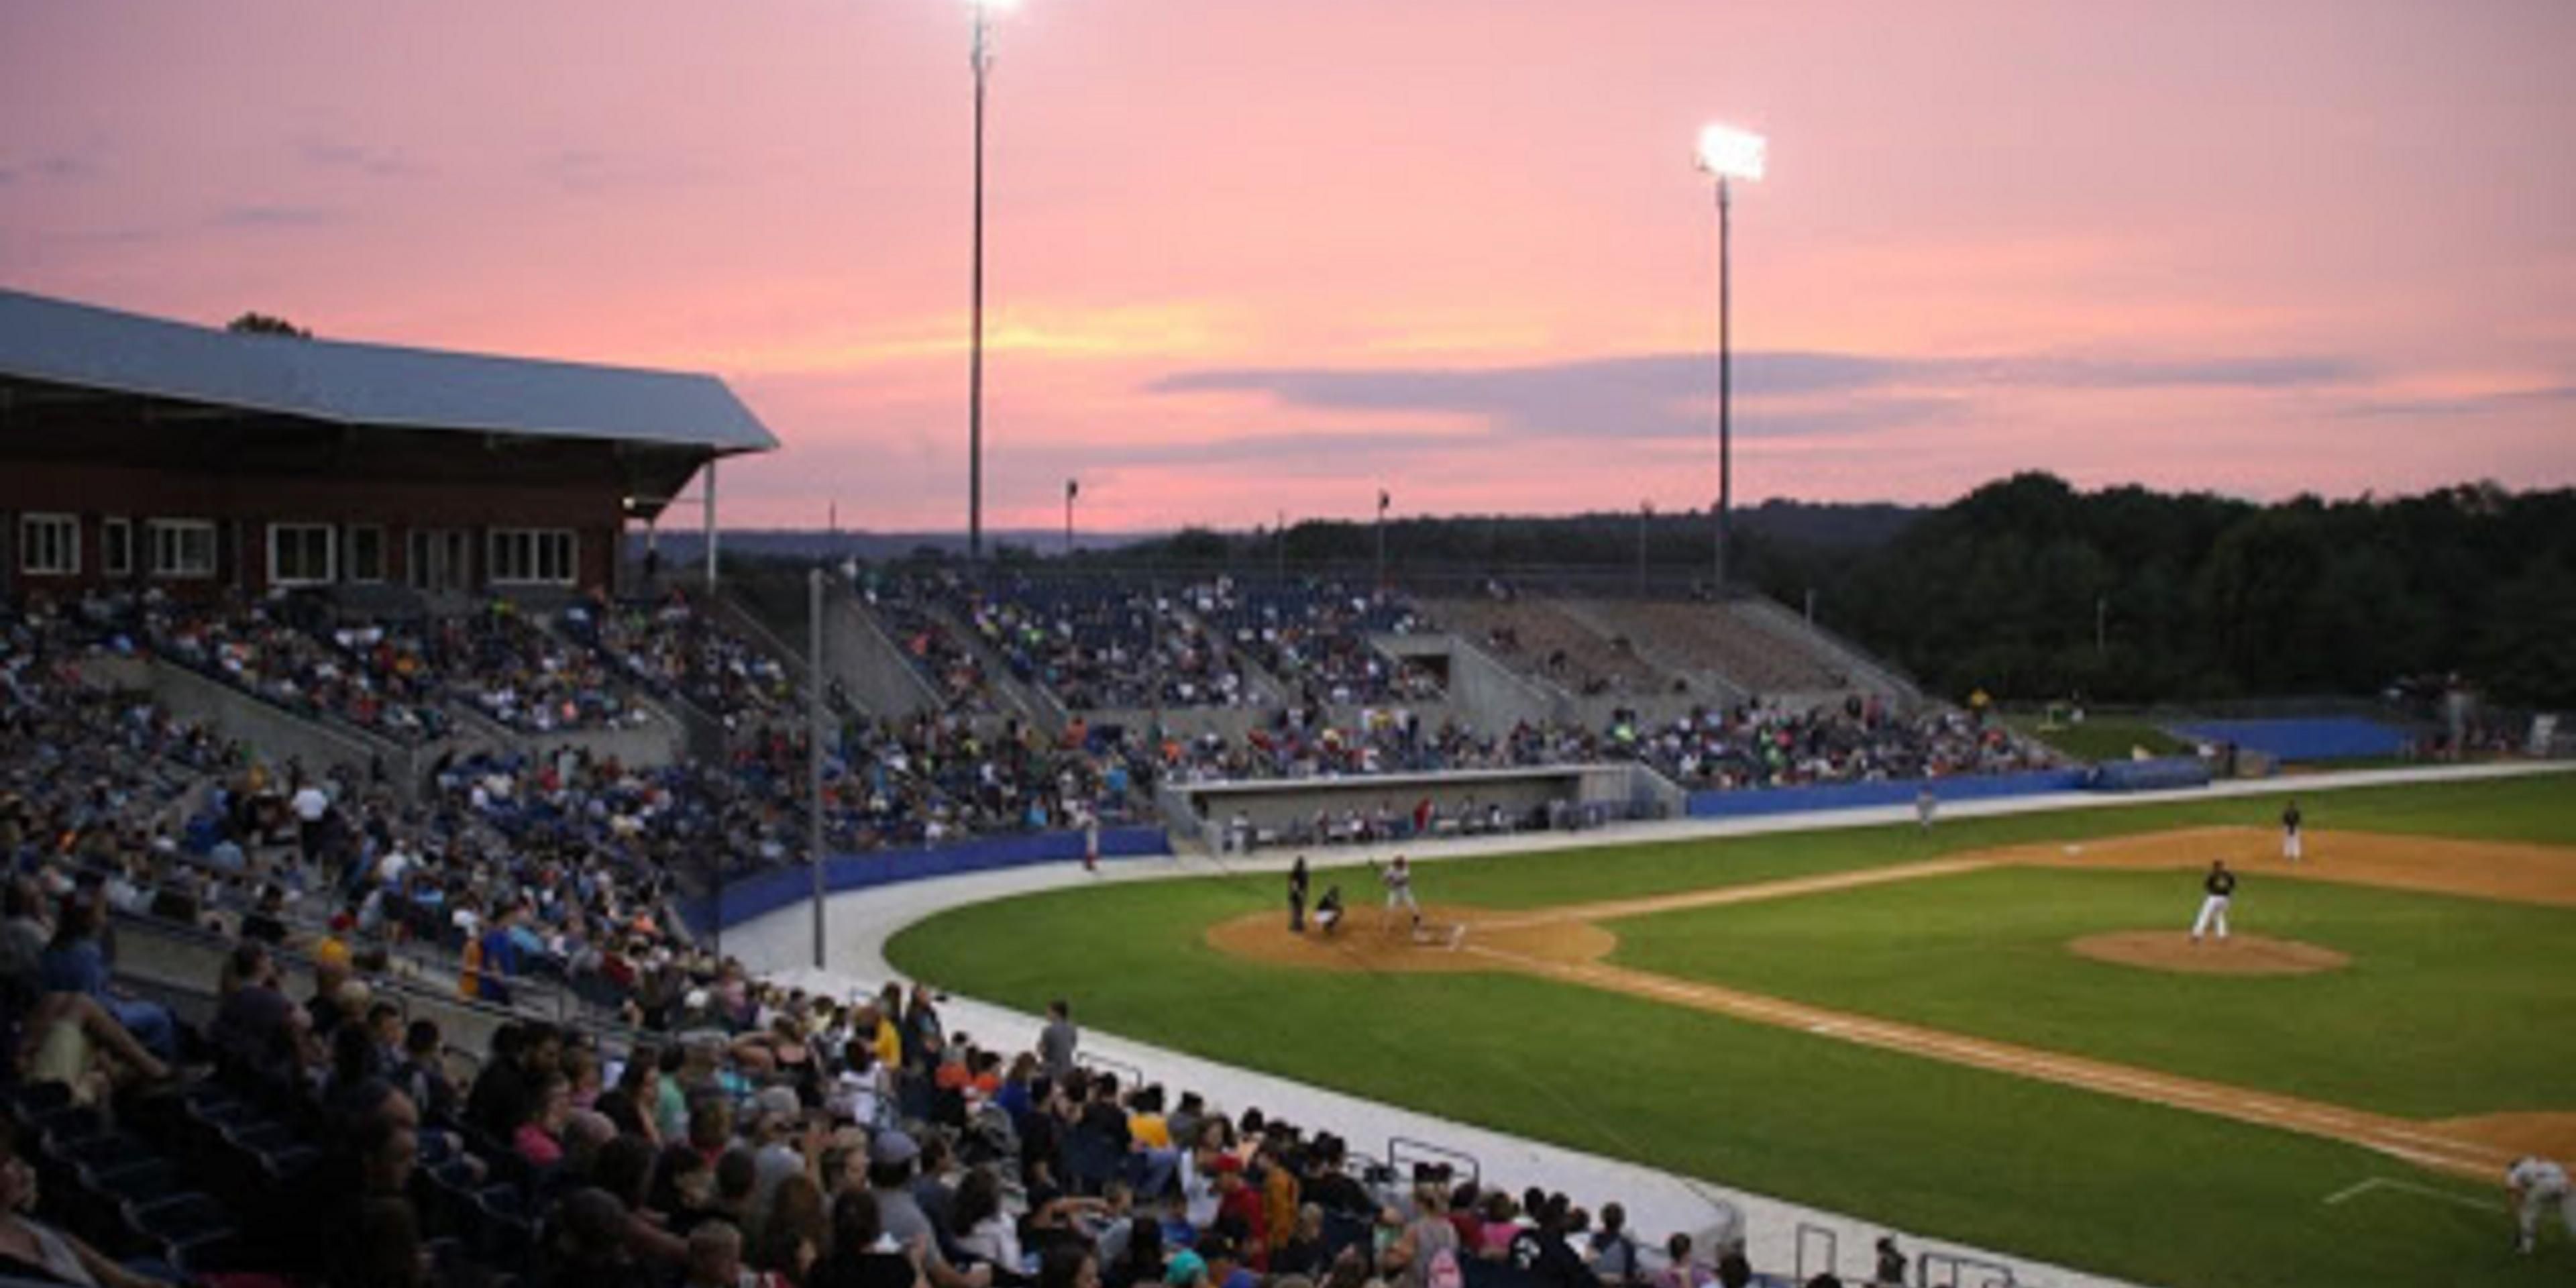 We are located minutes from the award-winning Skylands Stadium, North Jersey’s premier sports and entertainment venue. Home of Sussex County Miners Pro Baseball, Food Truck Festivals, Stunt Shows, Christmas Events, Concerts and more!